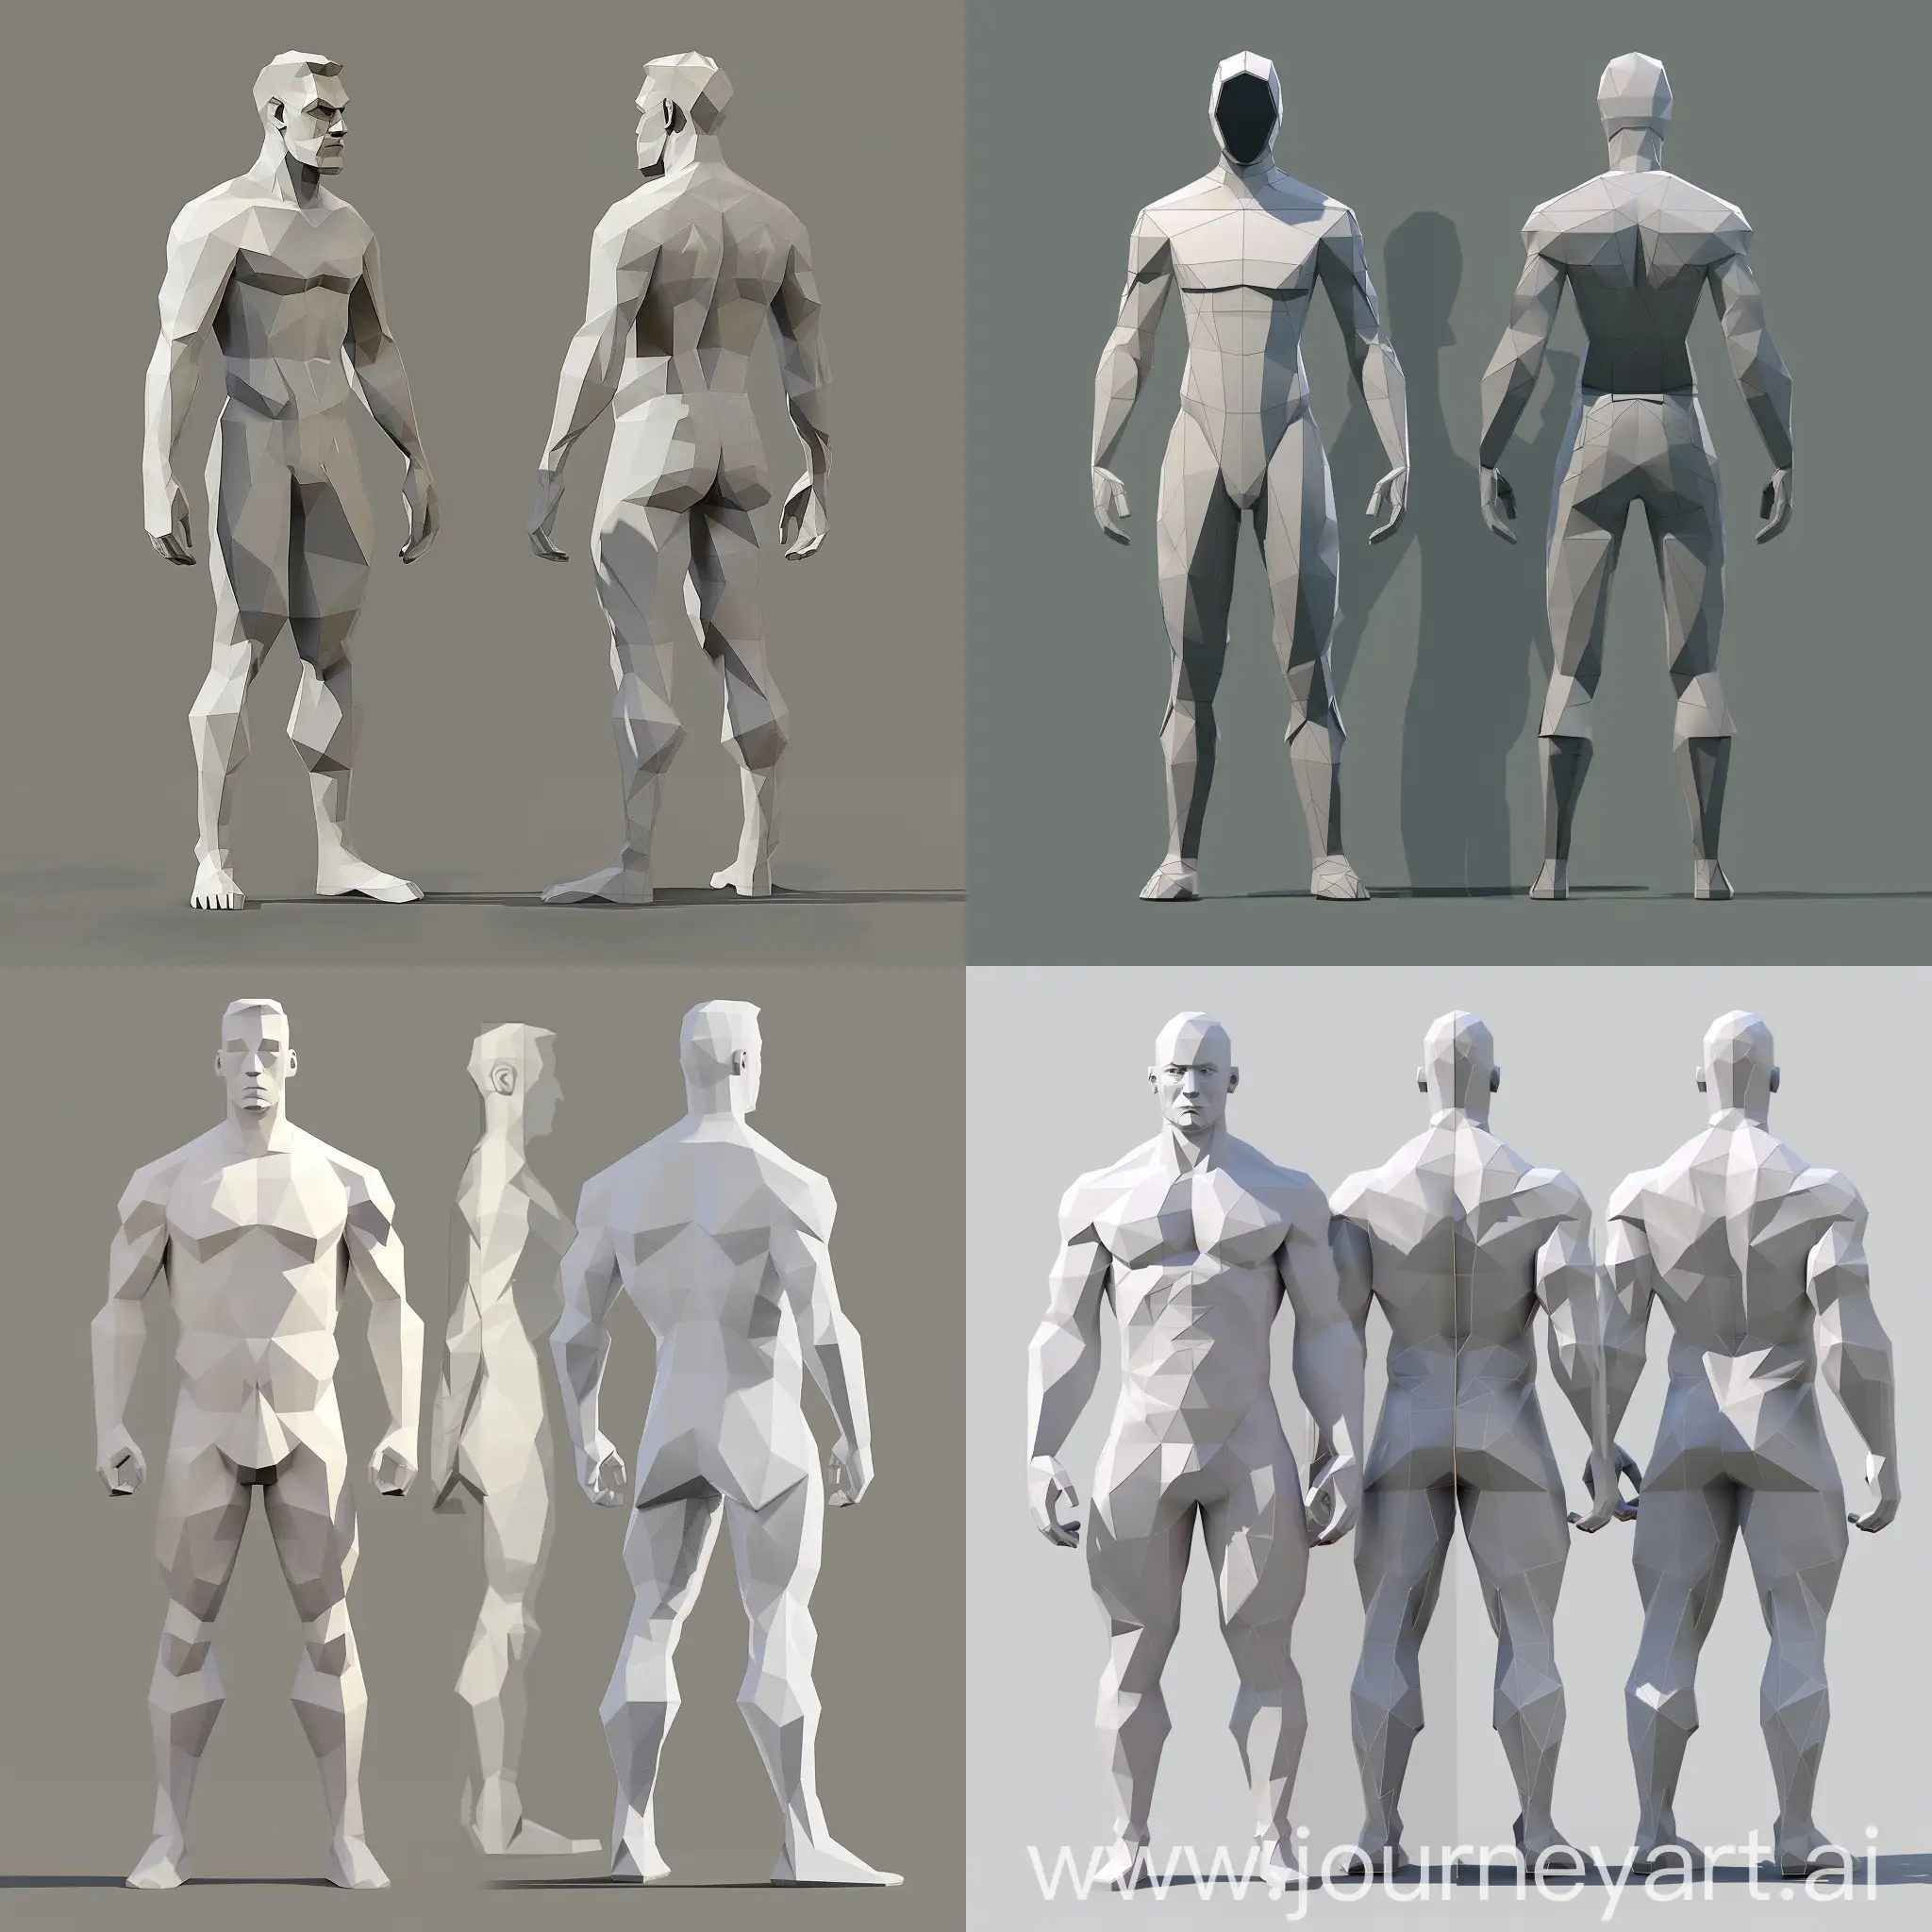 low poly character blender reference front and side full body. Please note that the front side and exactly the right side (I want to use a mirror in the centre) both sides have equal image sizes and are one image with polylines, no light effect no colour, and no shadow.